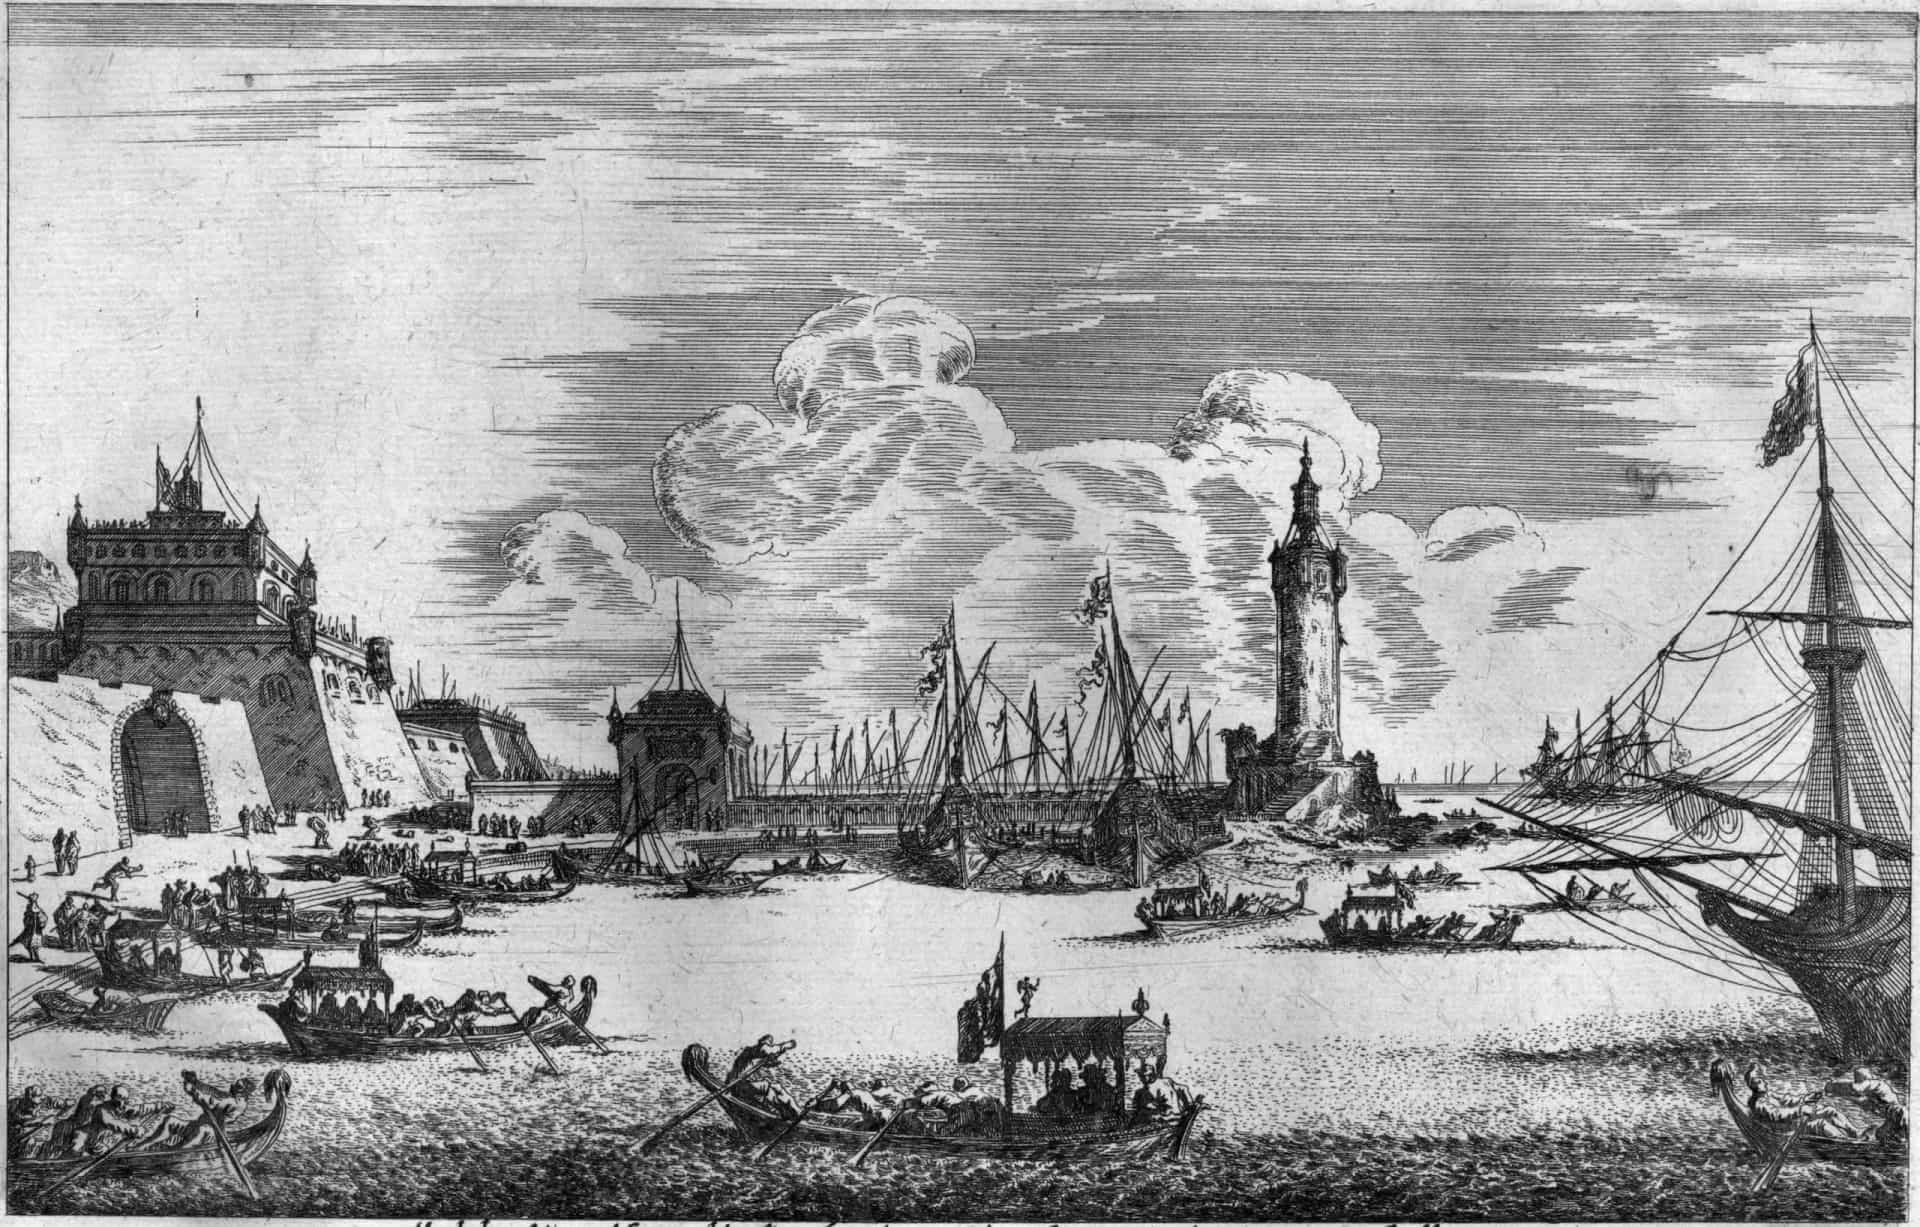 <p>It's suggested that Italy was the likely location of the first leisure excursion in a boat, a voyage we would today call a cruise. Departing Naples (pictured) in June 1833 and carrying European nobility, the vessel toured the Mediterranean before arriving in Constantinople.</p><p><a href="https://www.msn.com/en-za/community/channel/vid-7xx8mnucu55yw63we9va2gwr7uihbxwc68fxqp25x6tg4ftibpra?cvid=94631541bc0f4f89bfd59158d696ad7e">Follow us and access great exclusive content every day</a></p>